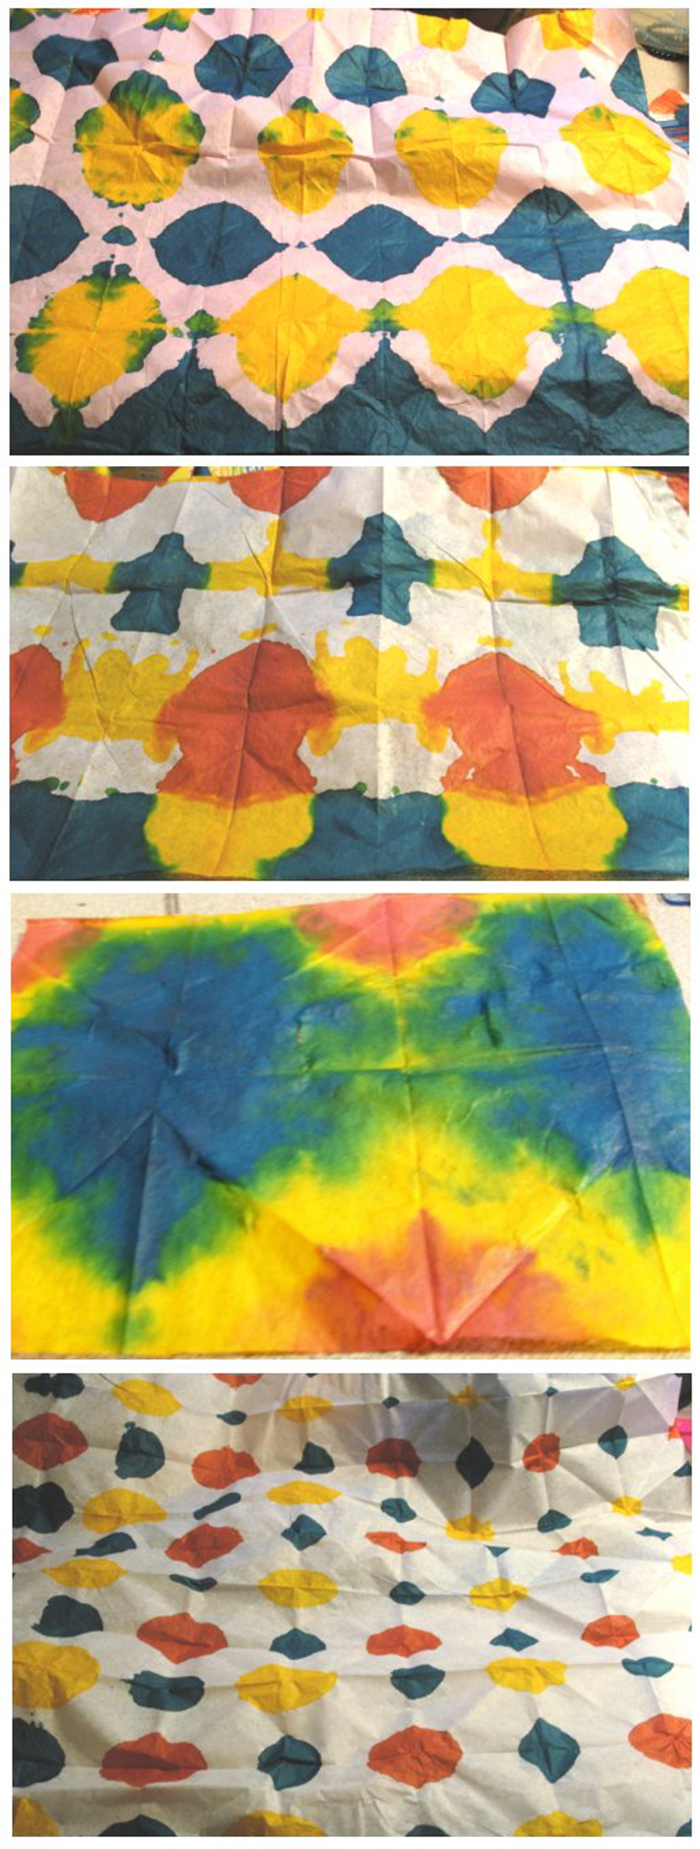 Things to make and do - Gallery: Tie-dye tissue paper by Jennifer Marohn